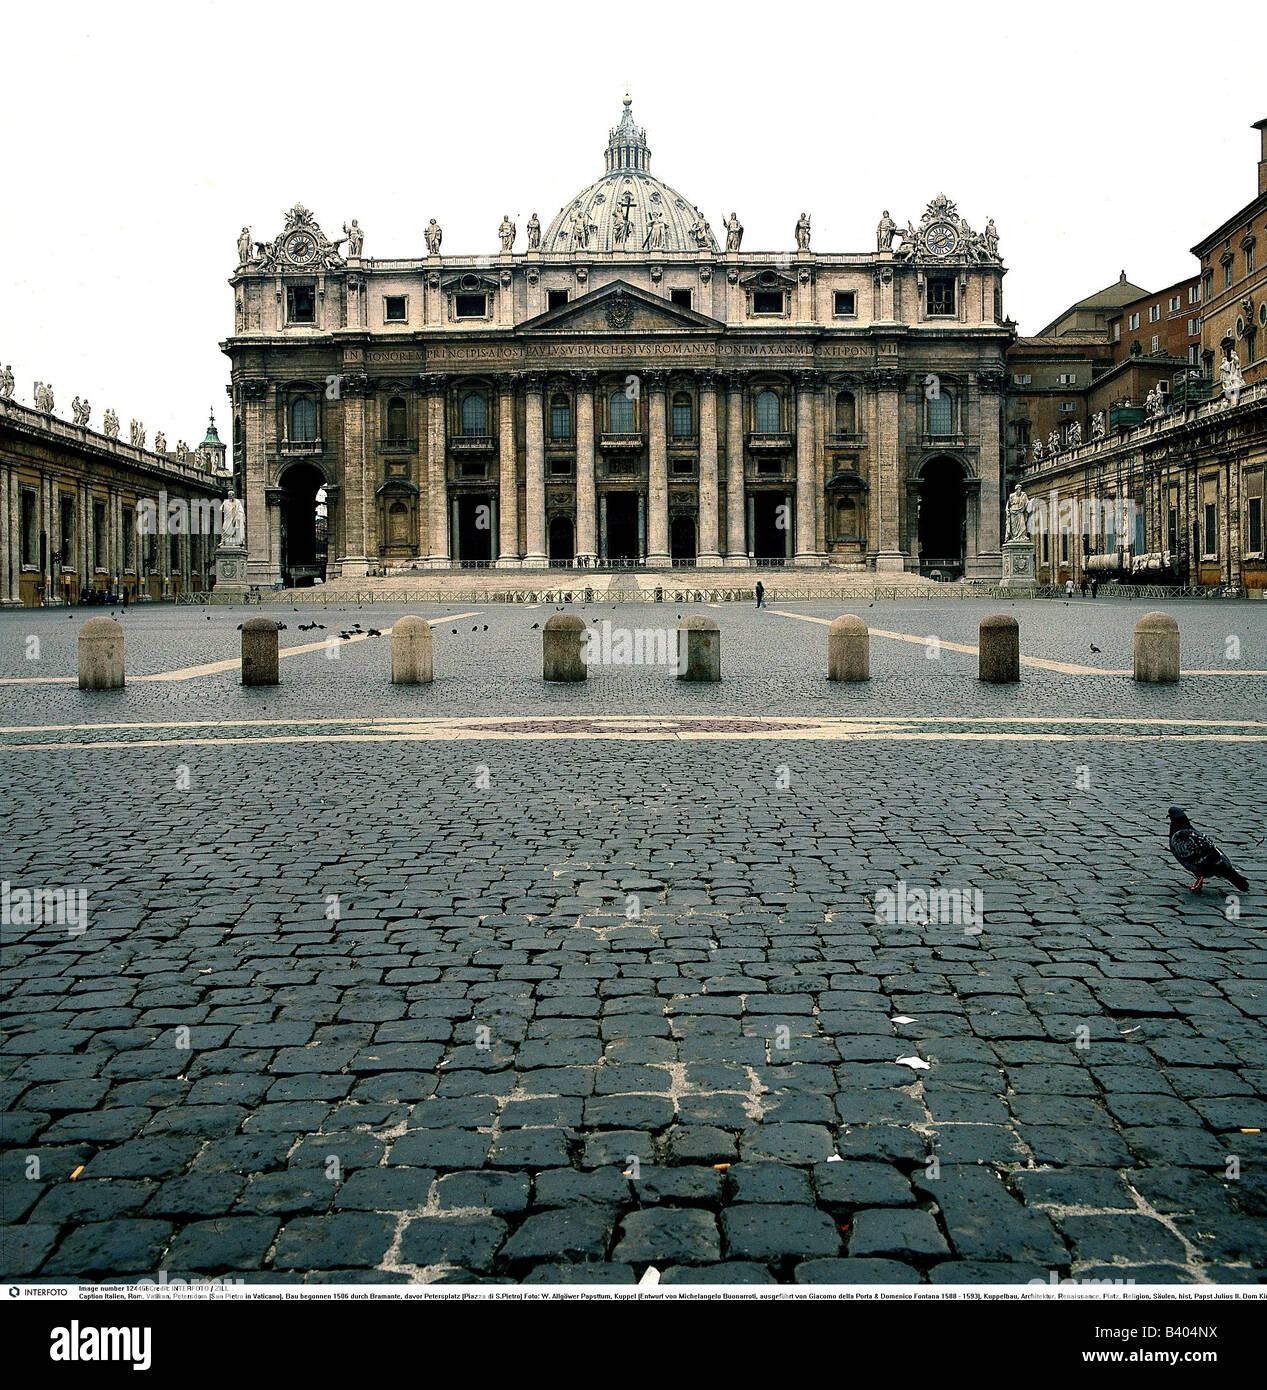 geography / travel, Italy, Rome, Vatican, Petersdom (San Pietro in Vaticano), built 1506 by Bramante, square, Petersplatz (Piazza di San Pedro), papacy, dome, domed, structure, (outline of Michelangelo Buonarroti executed by Giacomo Della Porta and Domenico Fontana 1588 - 1593), architecture, renaissance, square,  people, religion, columns, historical, historic, ancient, pope Julius II, UNESCO, World Heritage Site, Stock Photo